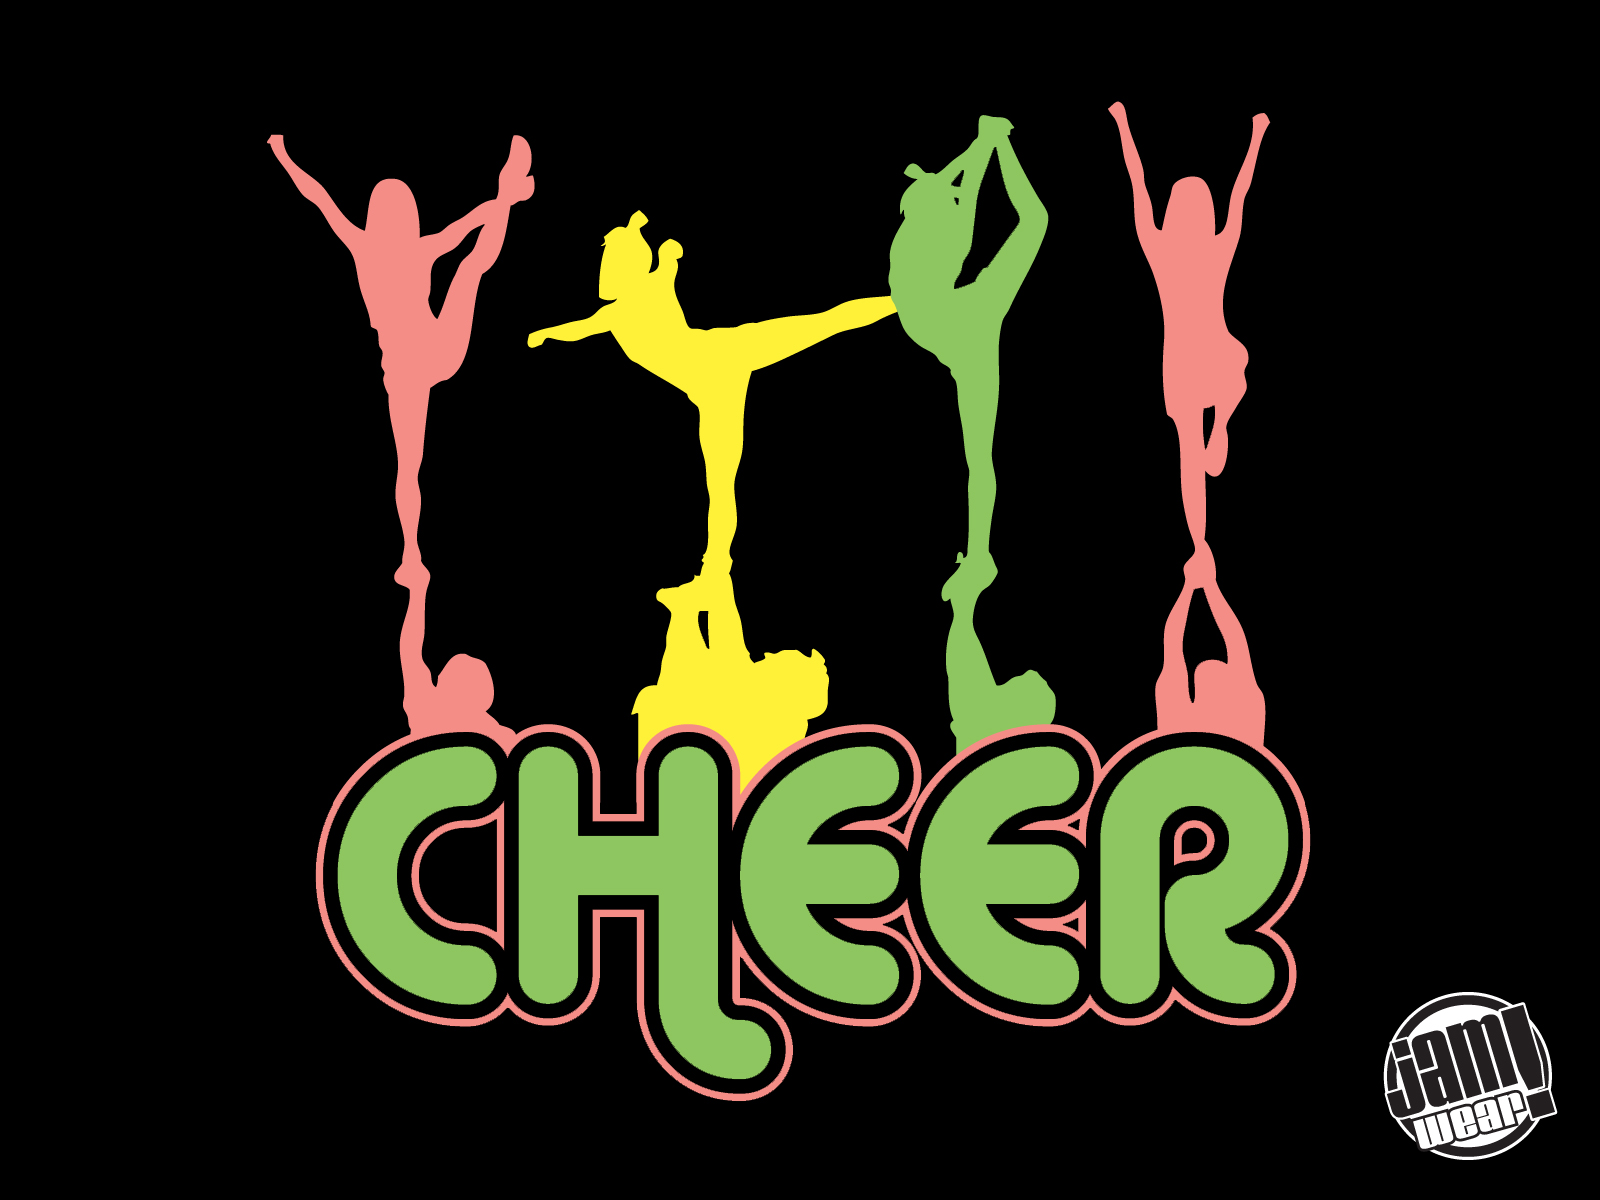 Cheerleading Fabric Wallpaper and Home Decor  Spoonflower